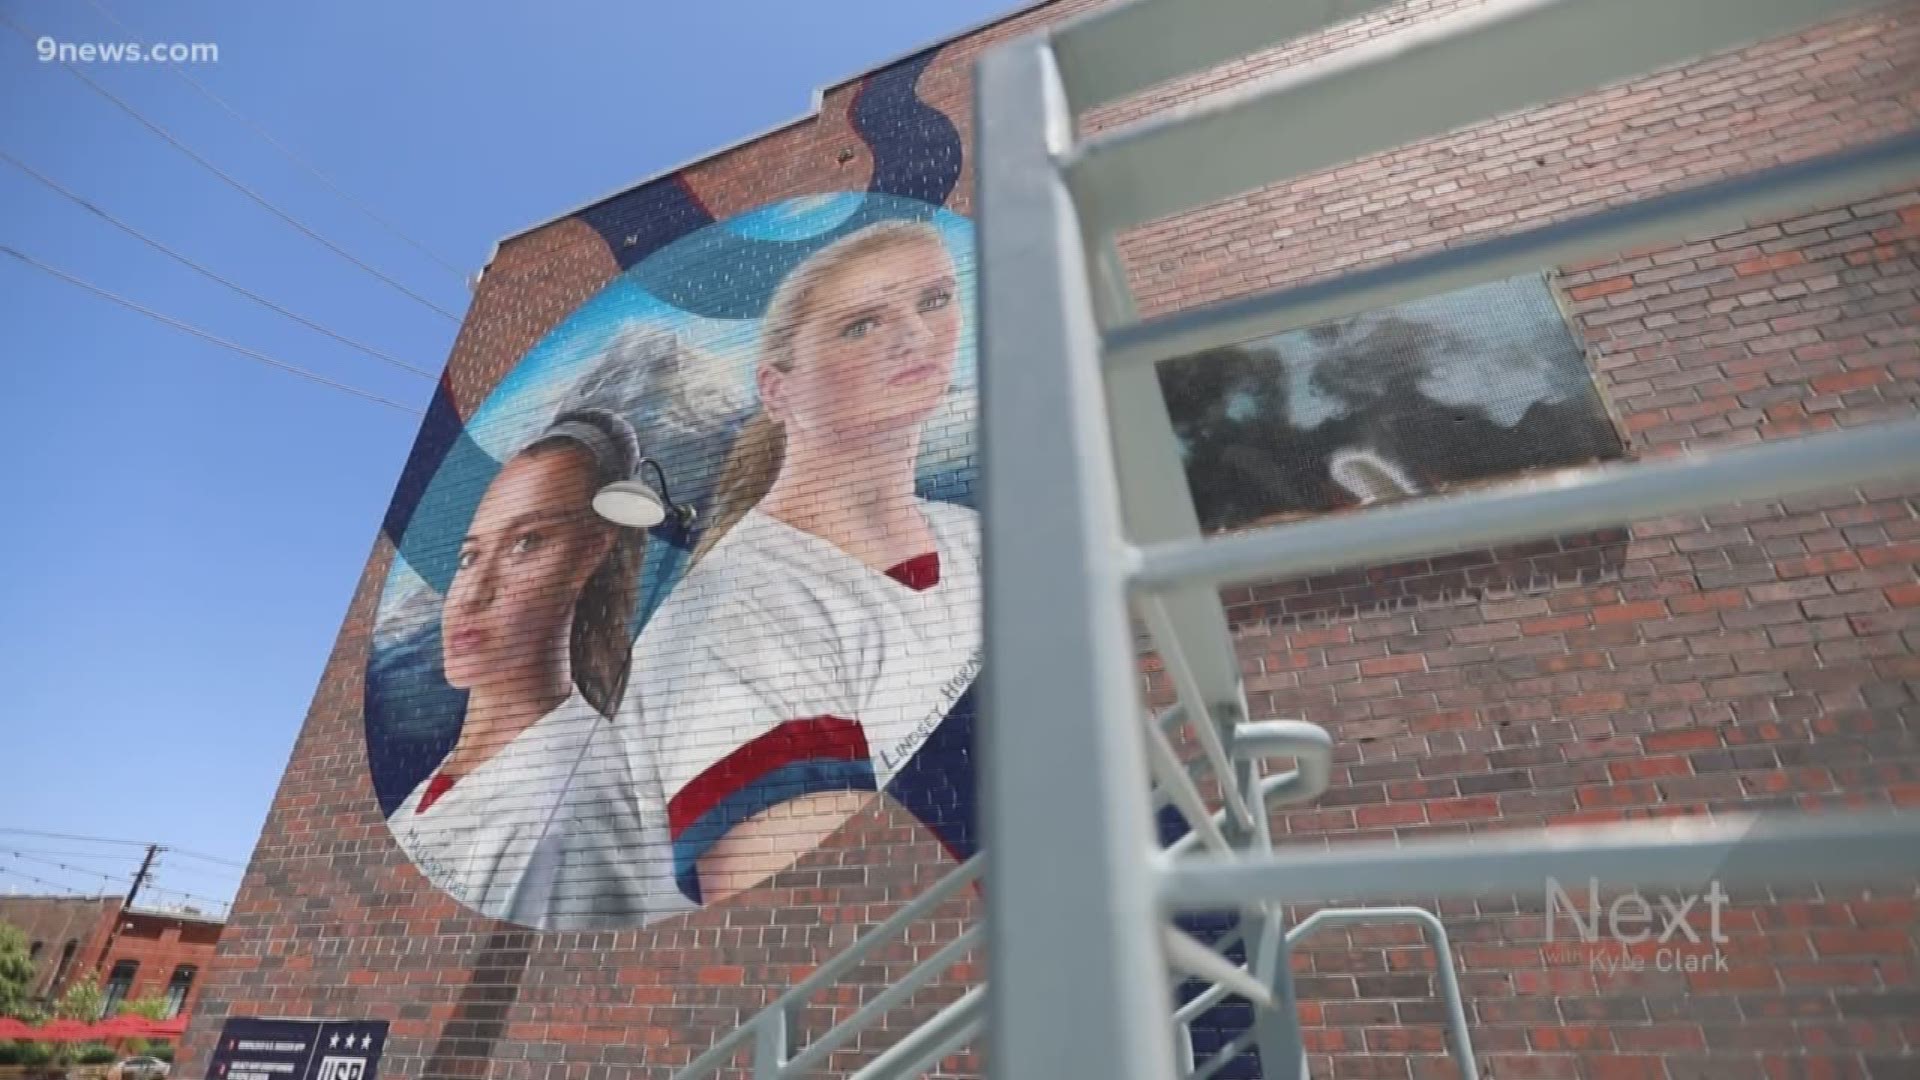 The mural of Lindsey Horan and Mallory Pugh is part of a larger campaign to create artwork of USWNT players in cities across the country.